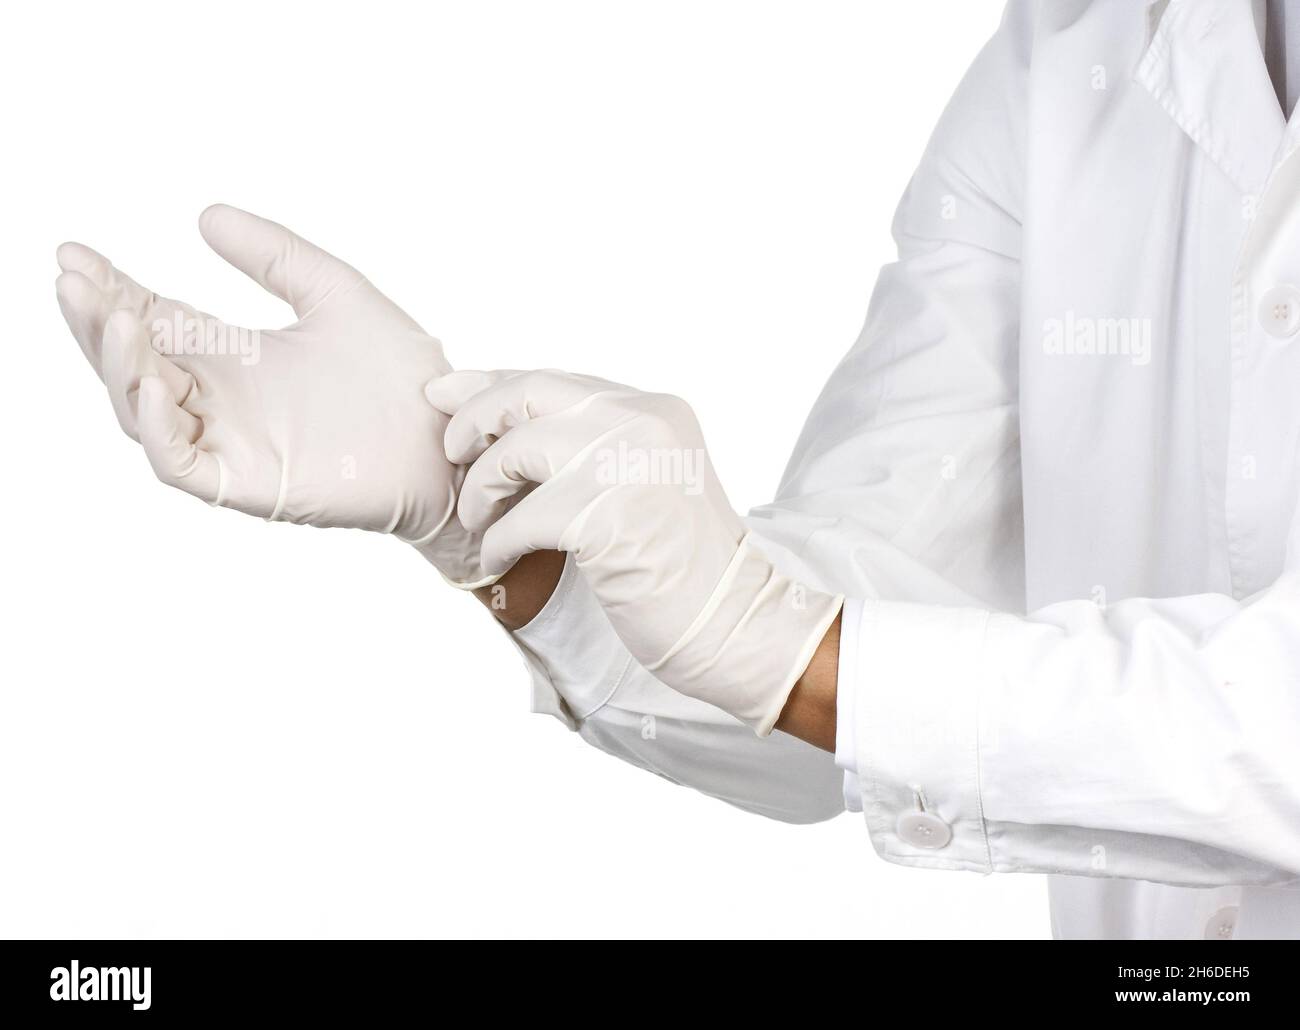 doctor putting on latex gloves Stock Photo